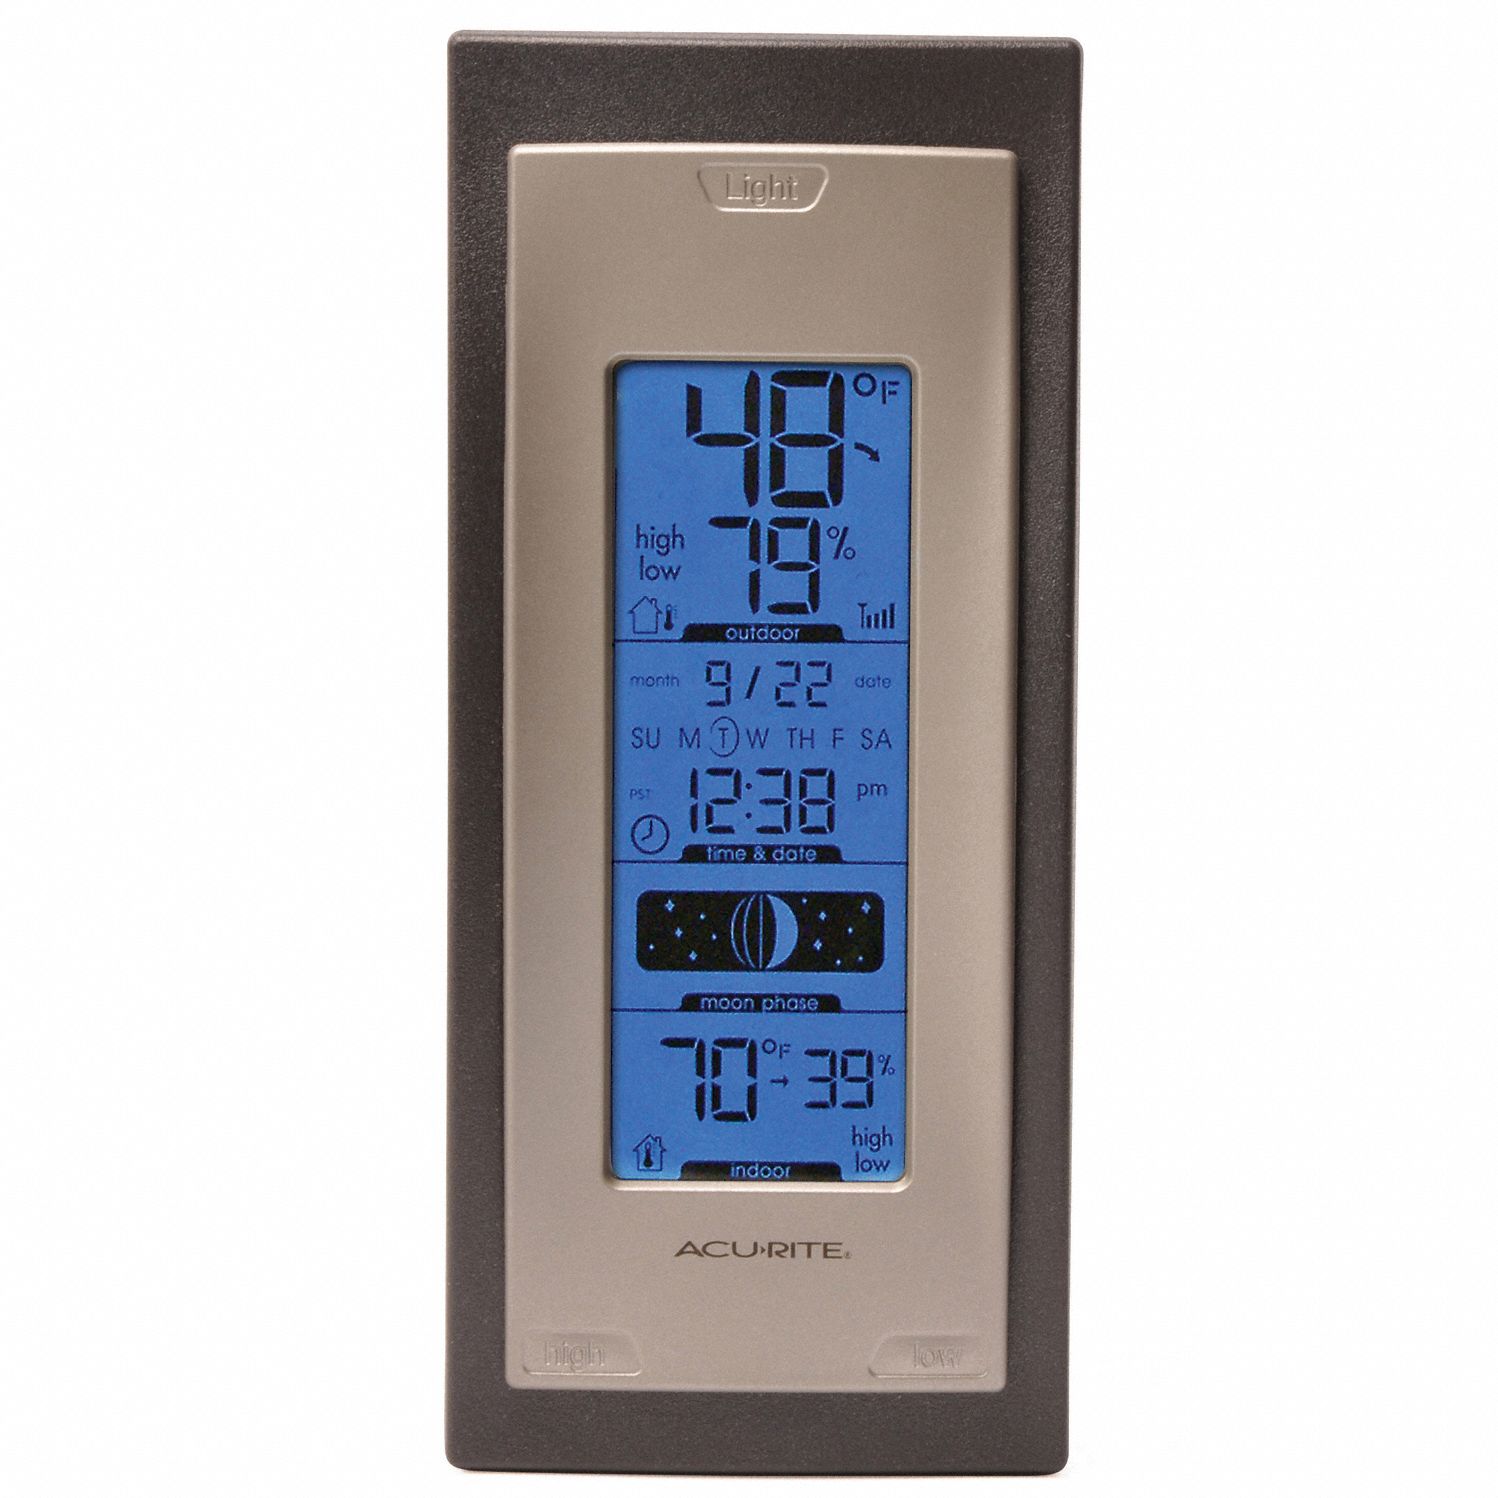 AcuRite AcuRite 00592A4 Wireless Indoor/Outdoor Thermometer with Humidity Sensor 